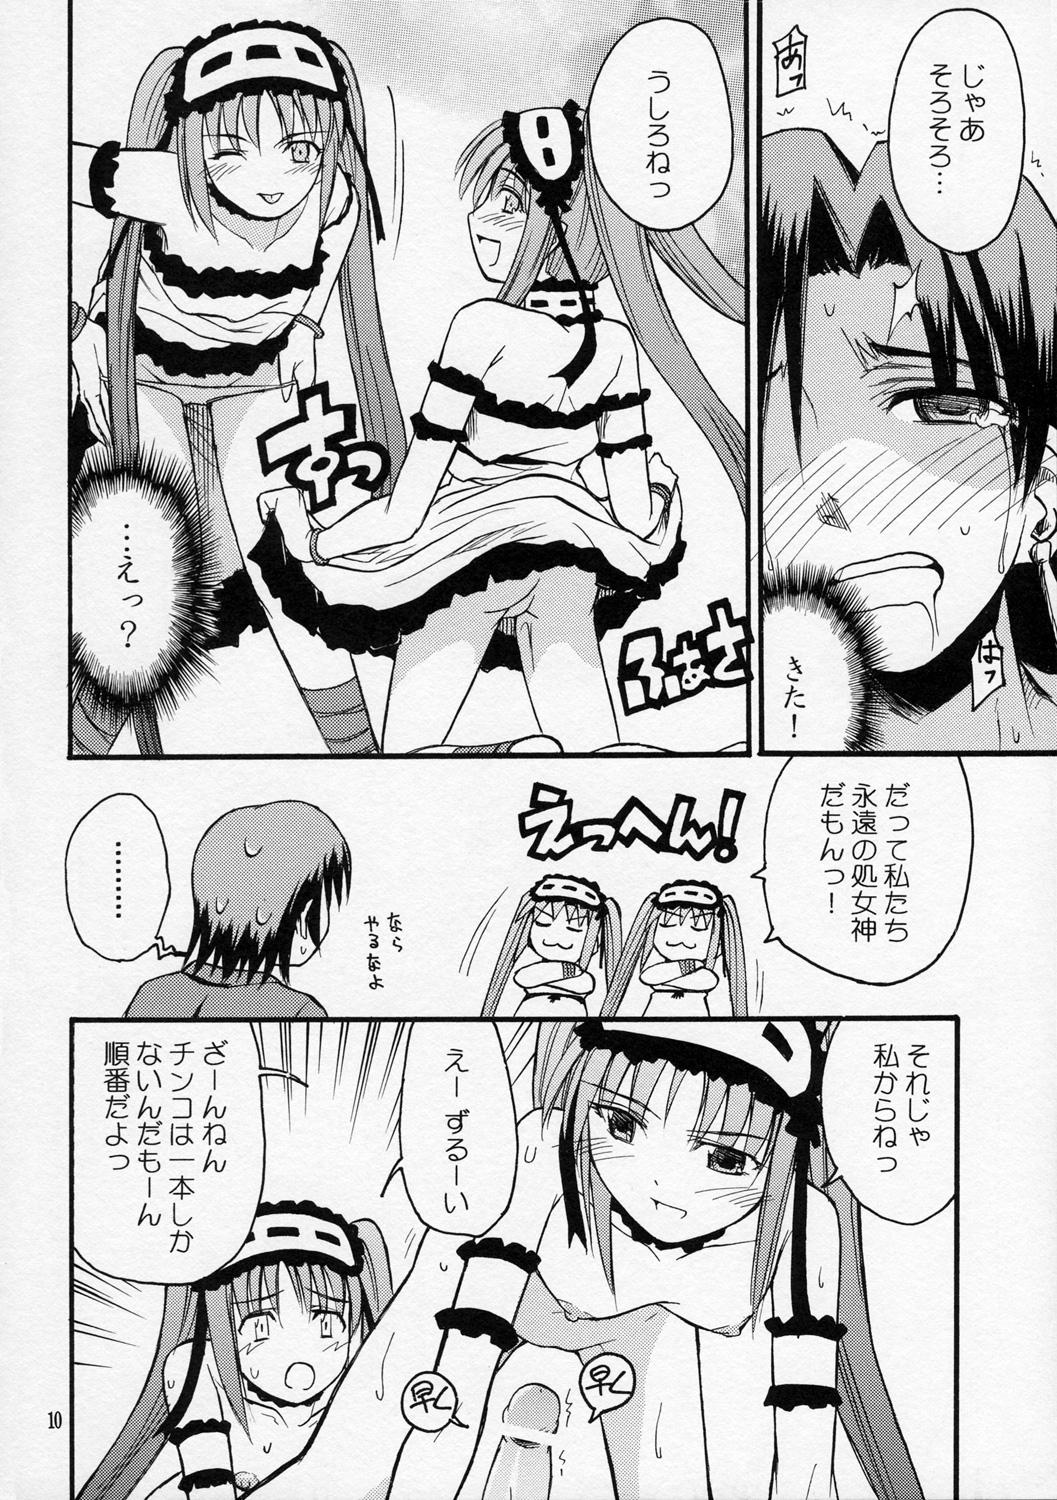 Babysitter Itsukame Baby - Fate hollow ataraxia Gostosas - Page 9